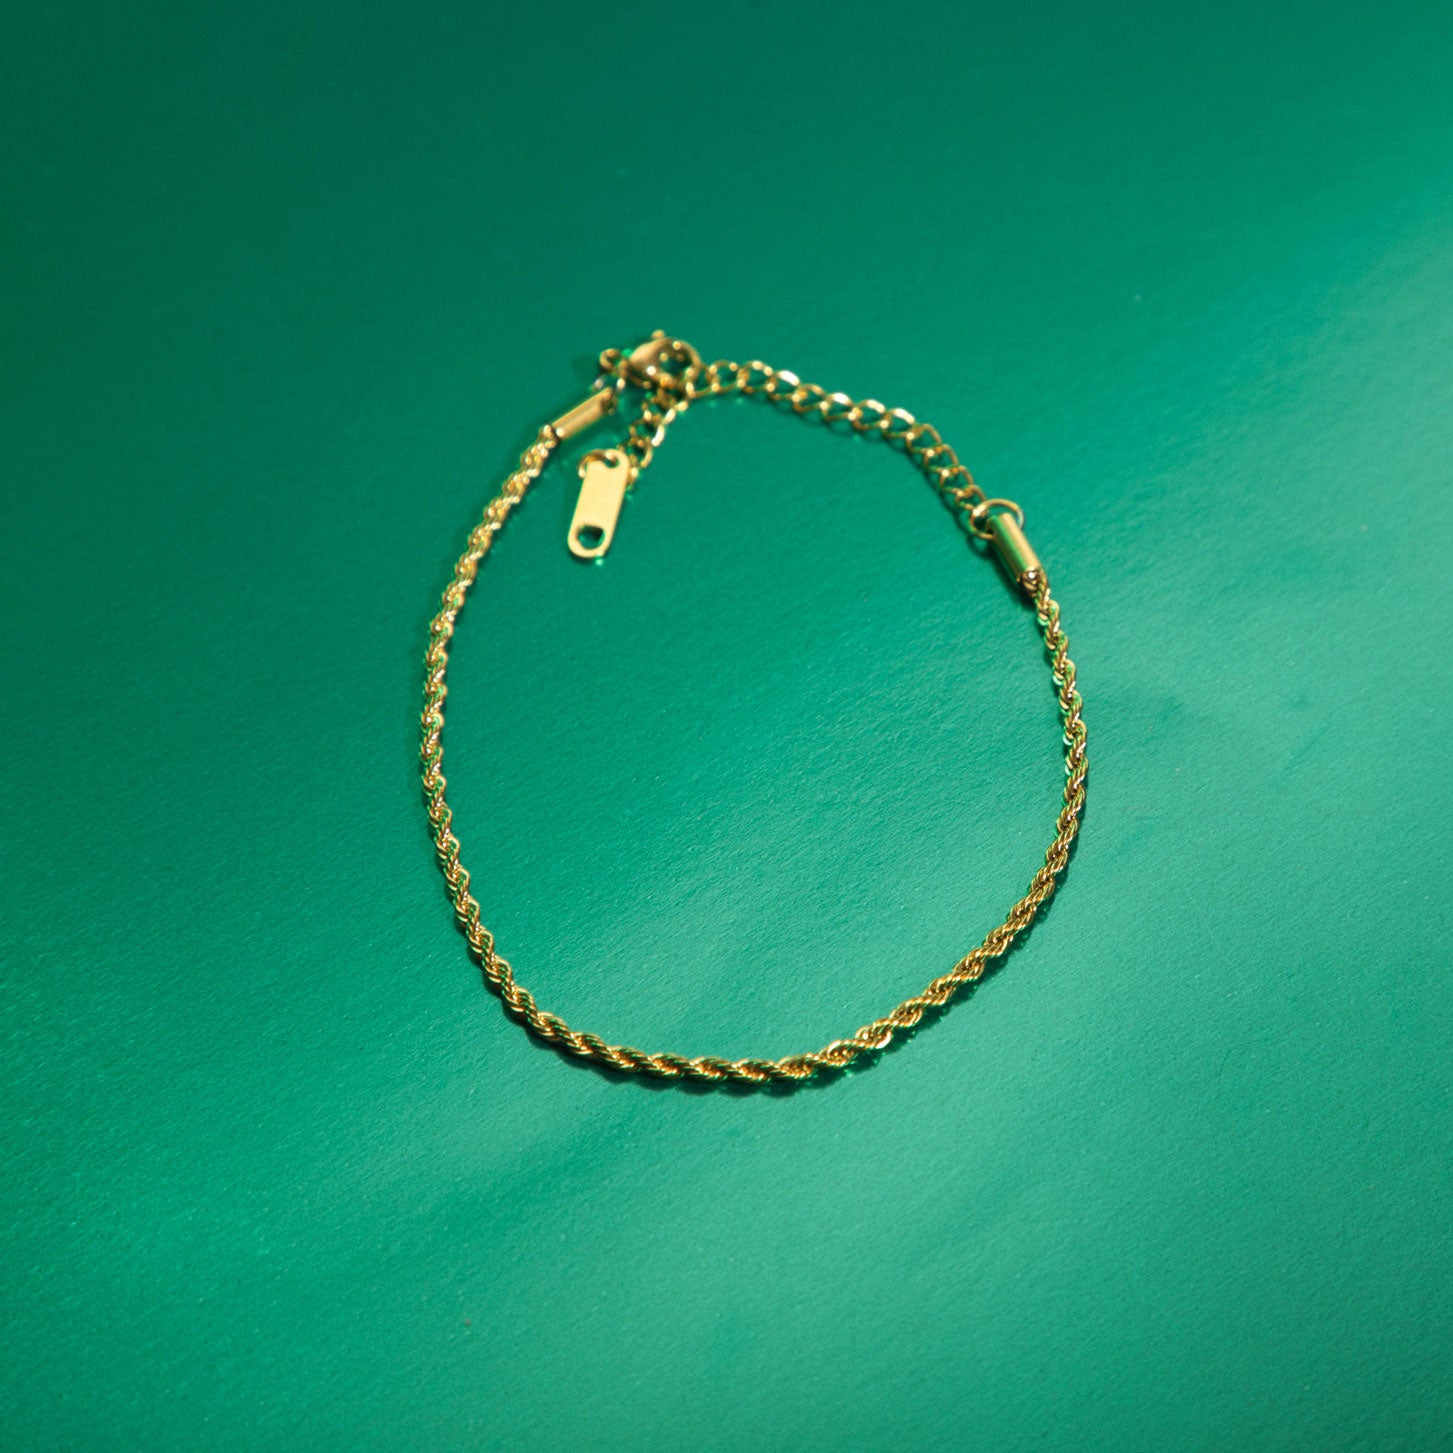 Image of the Twisted Chain Bracelet is crafted from 14K Gold Plated Stainless Steel, making it both non-tarnish and water resistant. It is also free from Nickel, Lead and Cadmium, ensuring a safe and durable design. Additionally, this bracelet is adjustable for a perfect fit.